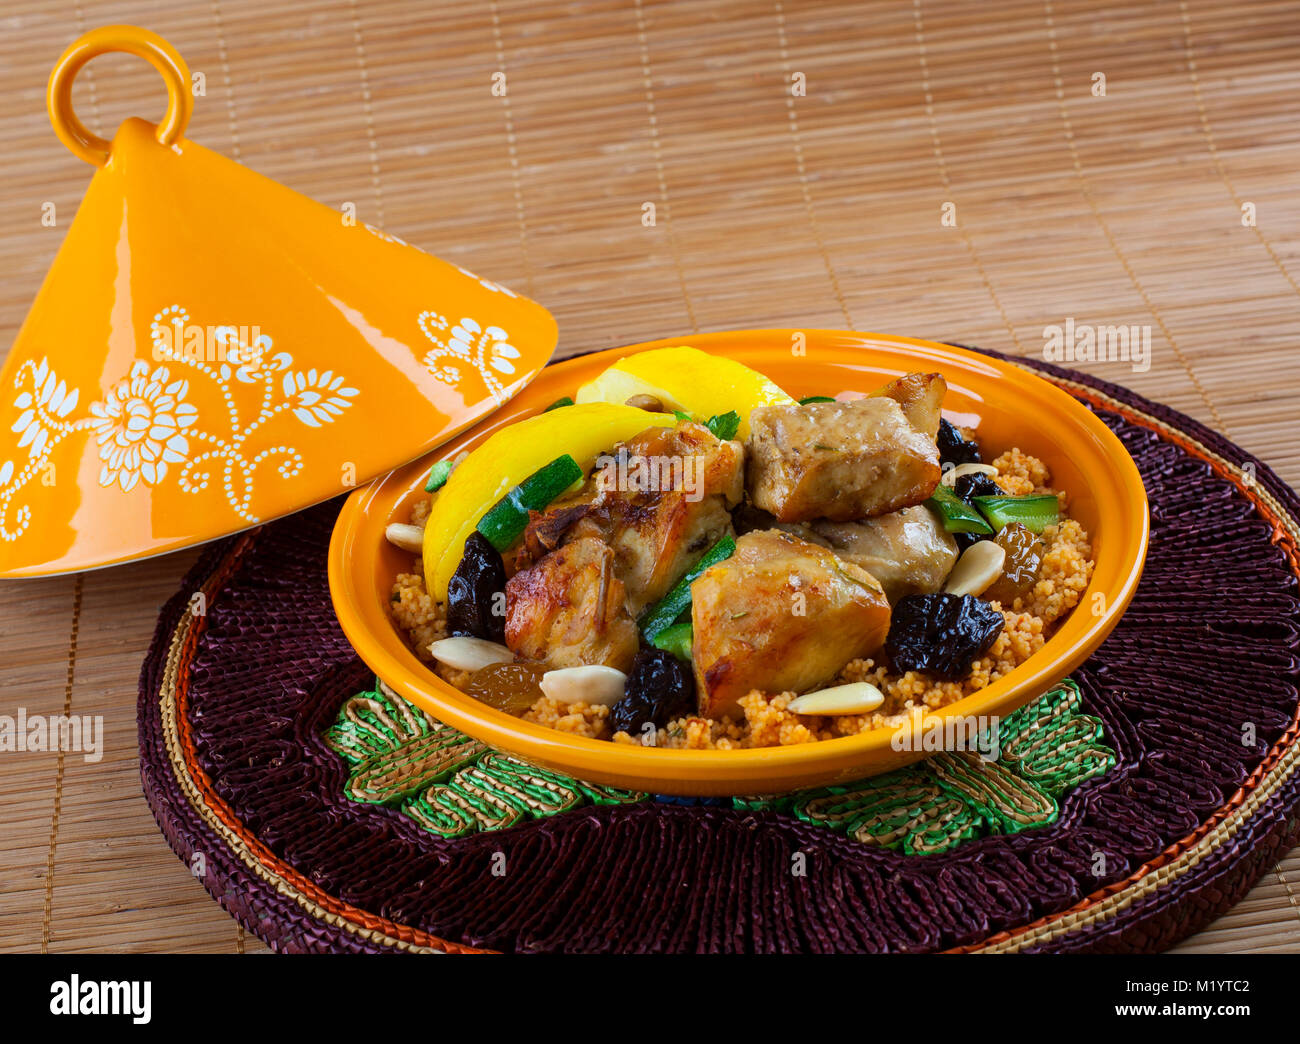 Tajine, Moroccan food, with cous cous, chicken and lemon confit. Stock Photo